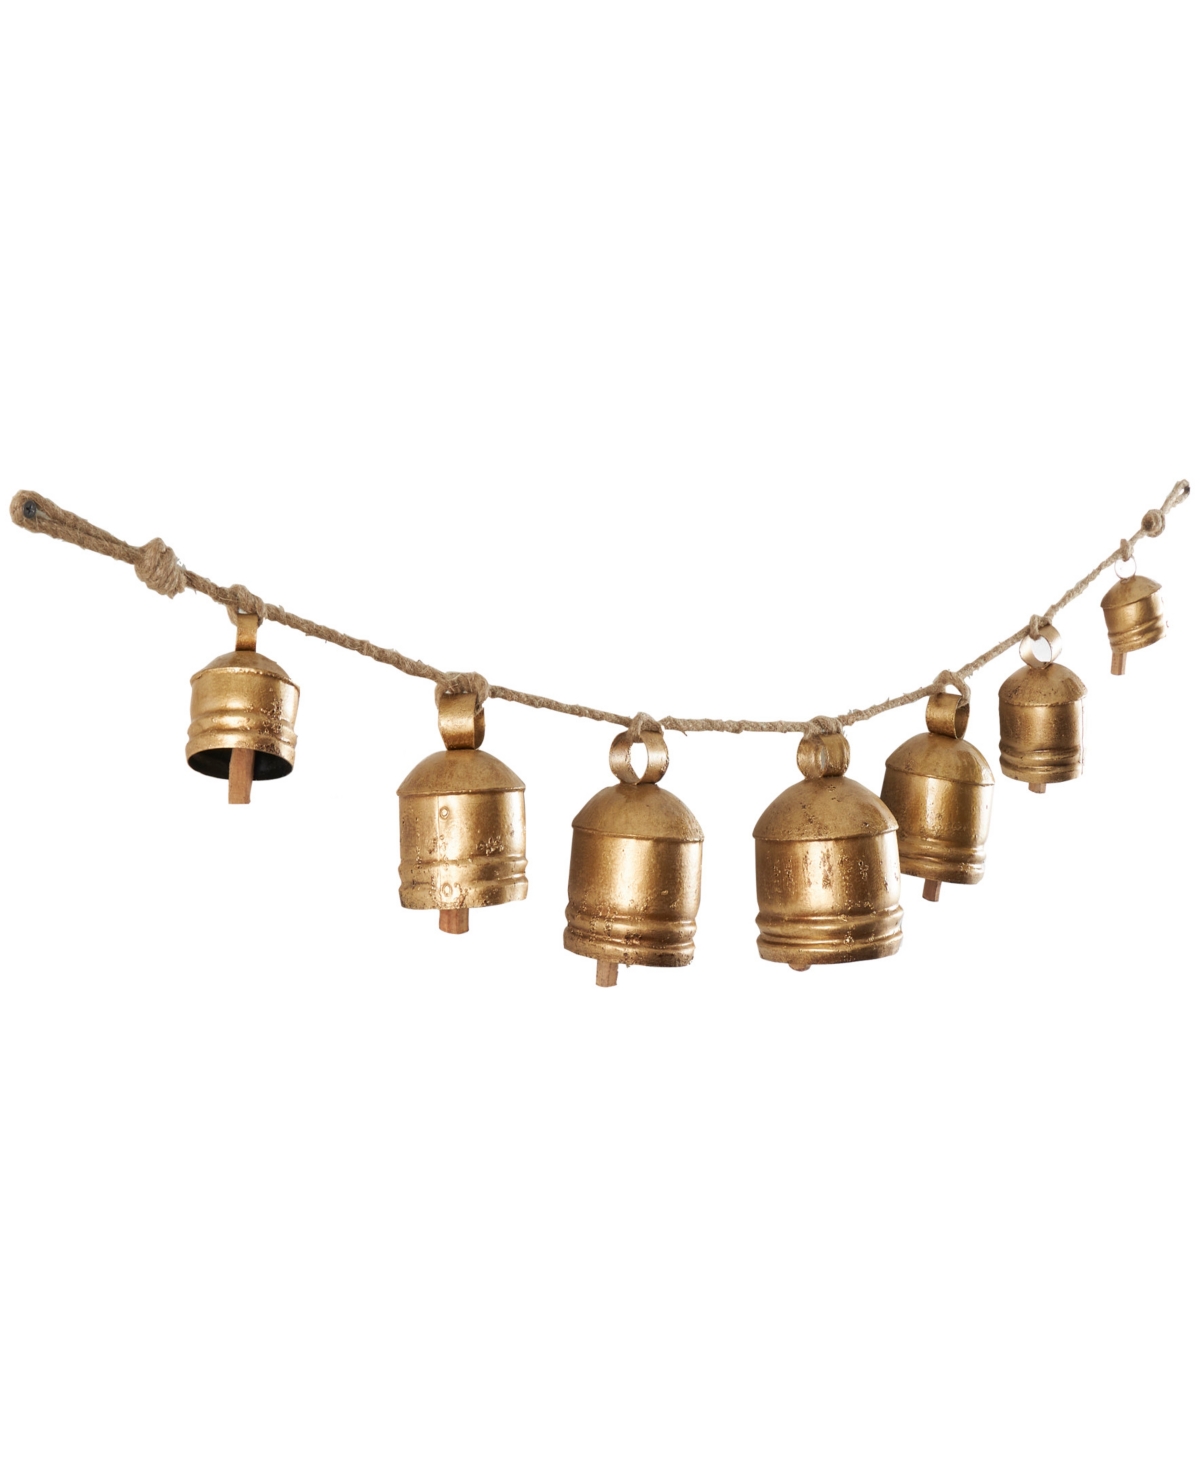 Rosemary Lane Metal Tibetan Inspired String Hanging Decorative Cow Bell With Jute Hanging Rope, 53" X 5" X 7" In Gold